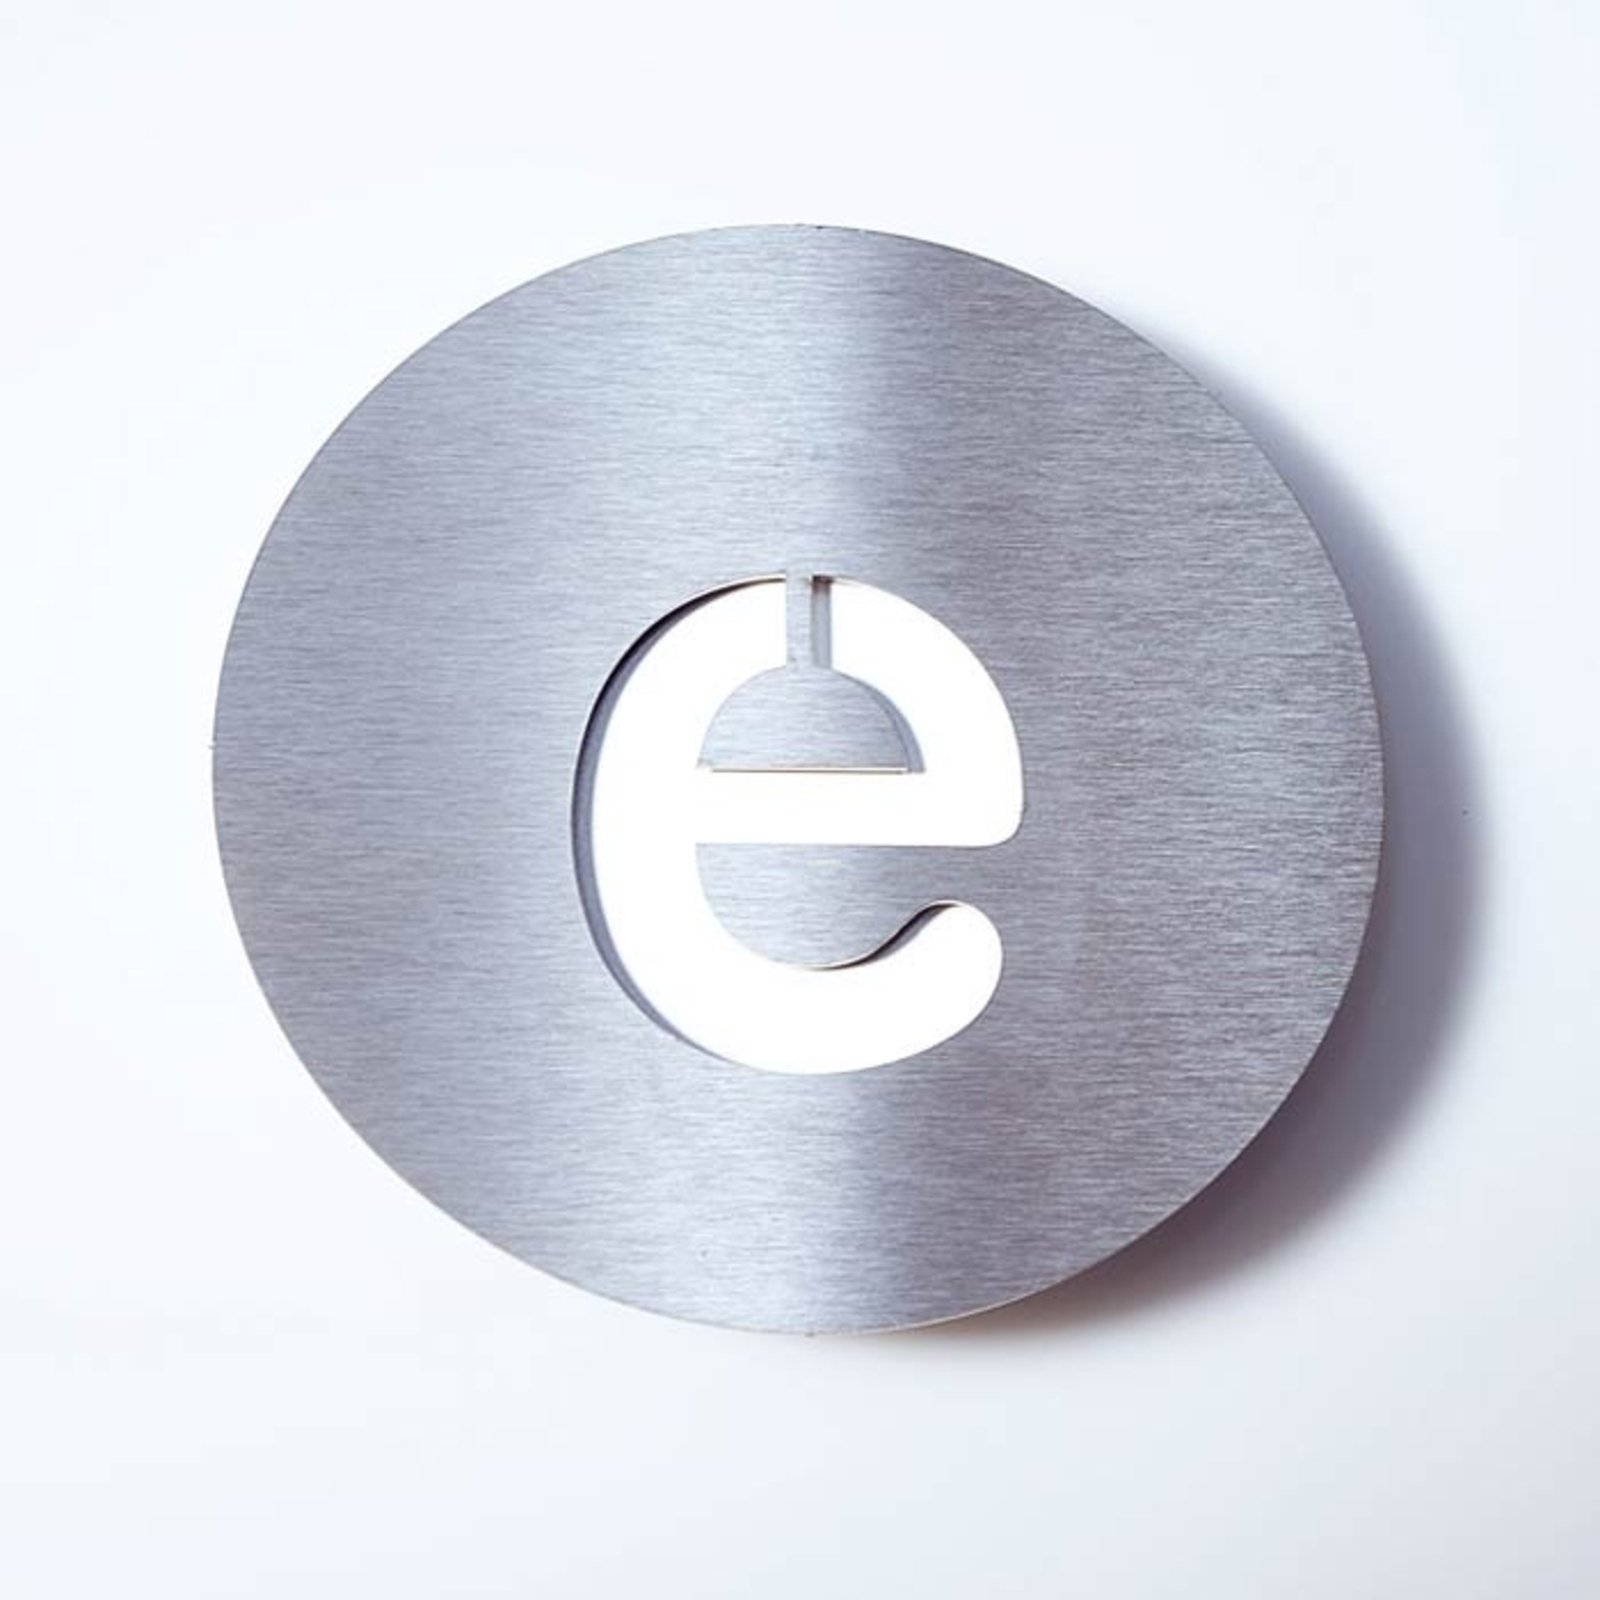 Round stainless steel house number - e